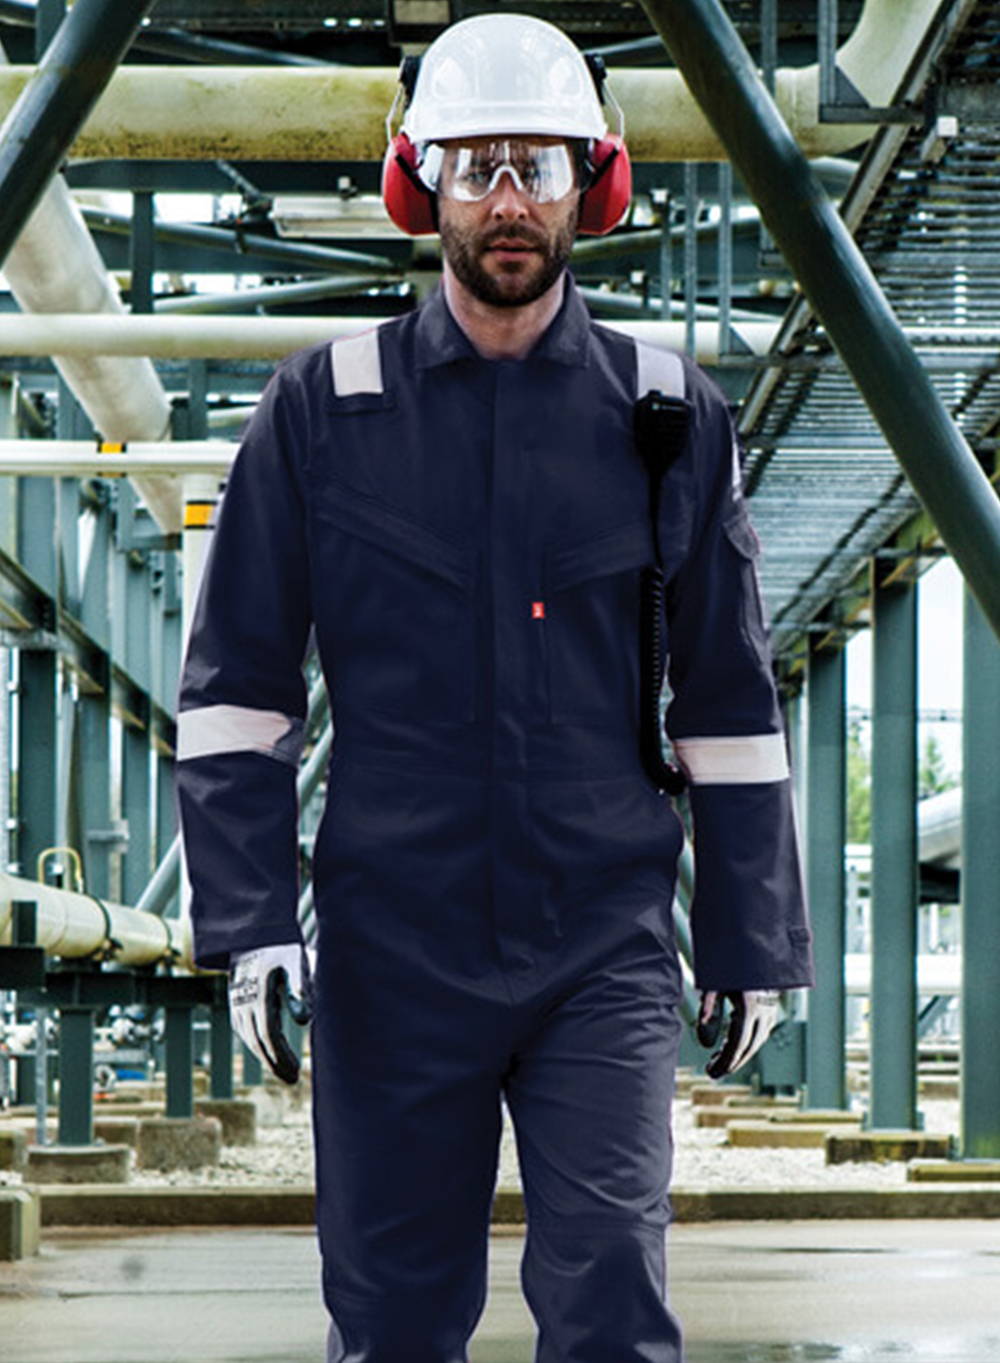 Man walking through tunnel wearing navy coveralls with white hard hat, earmuffs and safety glasses.